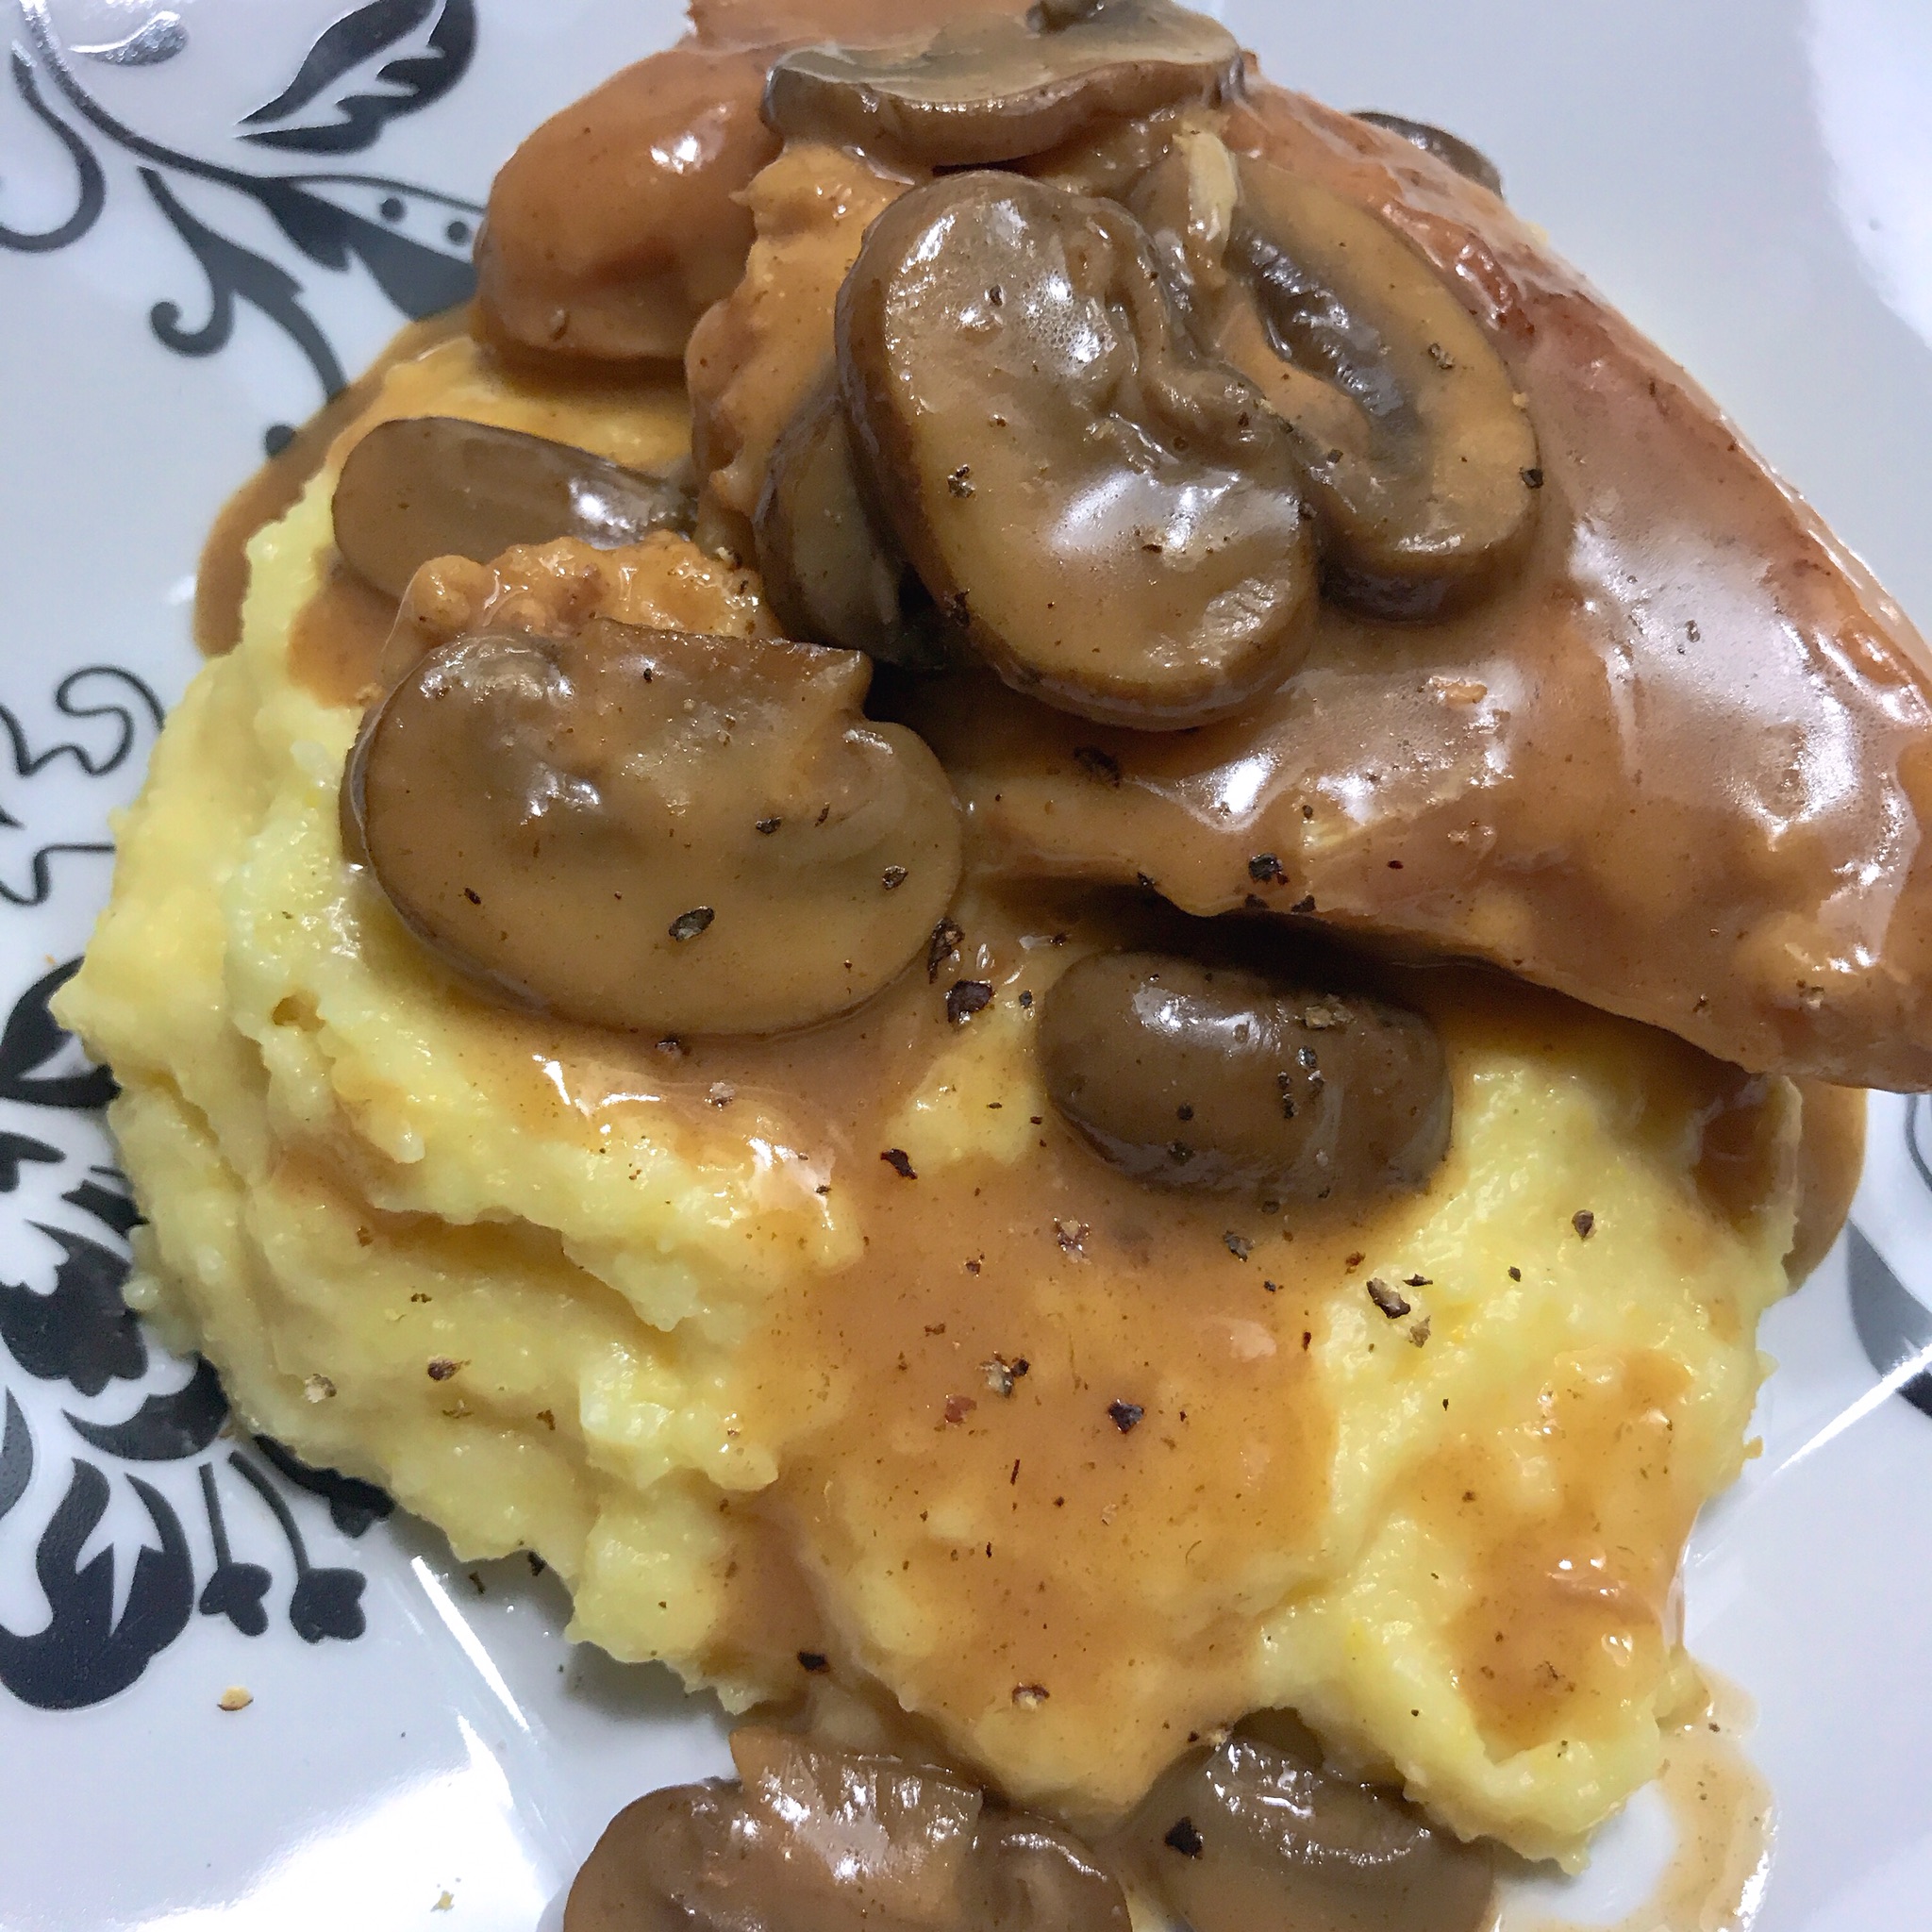 <p>This chicken Marsala recipe uses the Instant Pot's saute function to create moist chicken breasts in a rich Marsala wine and mushroom sauce. "It was quick easy and quite tasty," says Gonzo. "This will be made many times in the future!"</p>
                          